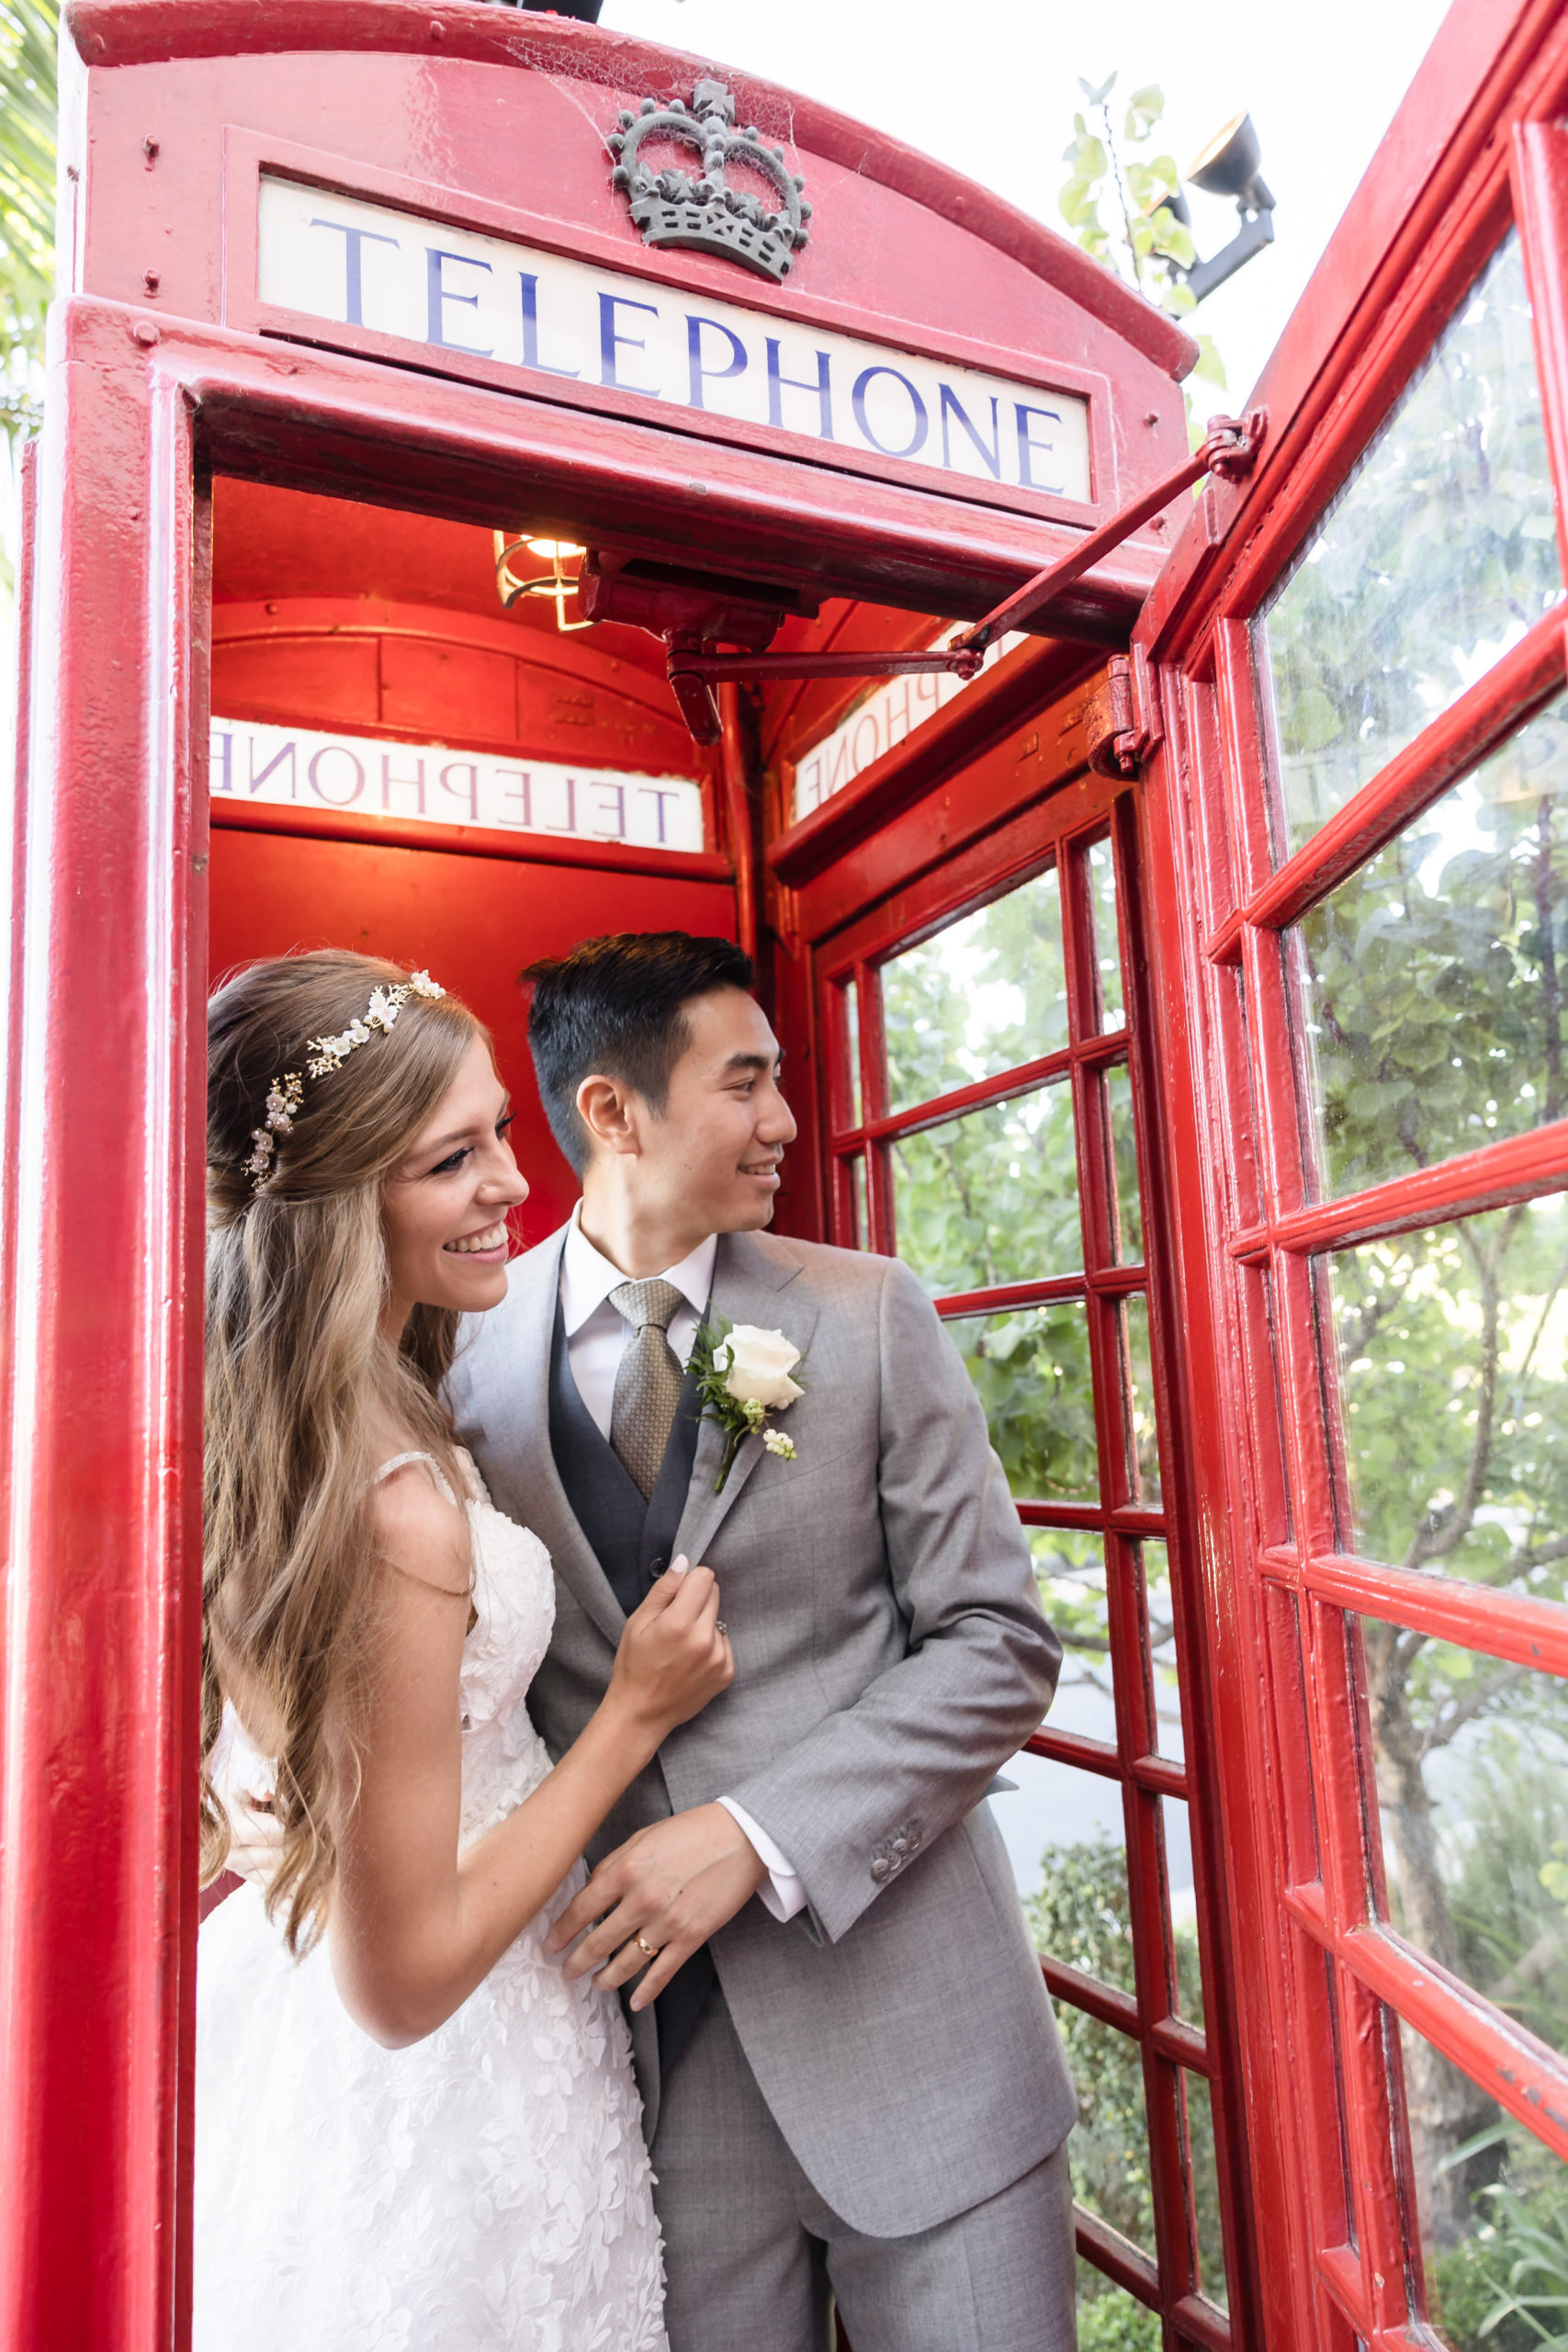 Bride and groom posing inside red telephone booth, captured by Christopher Brown Weddings